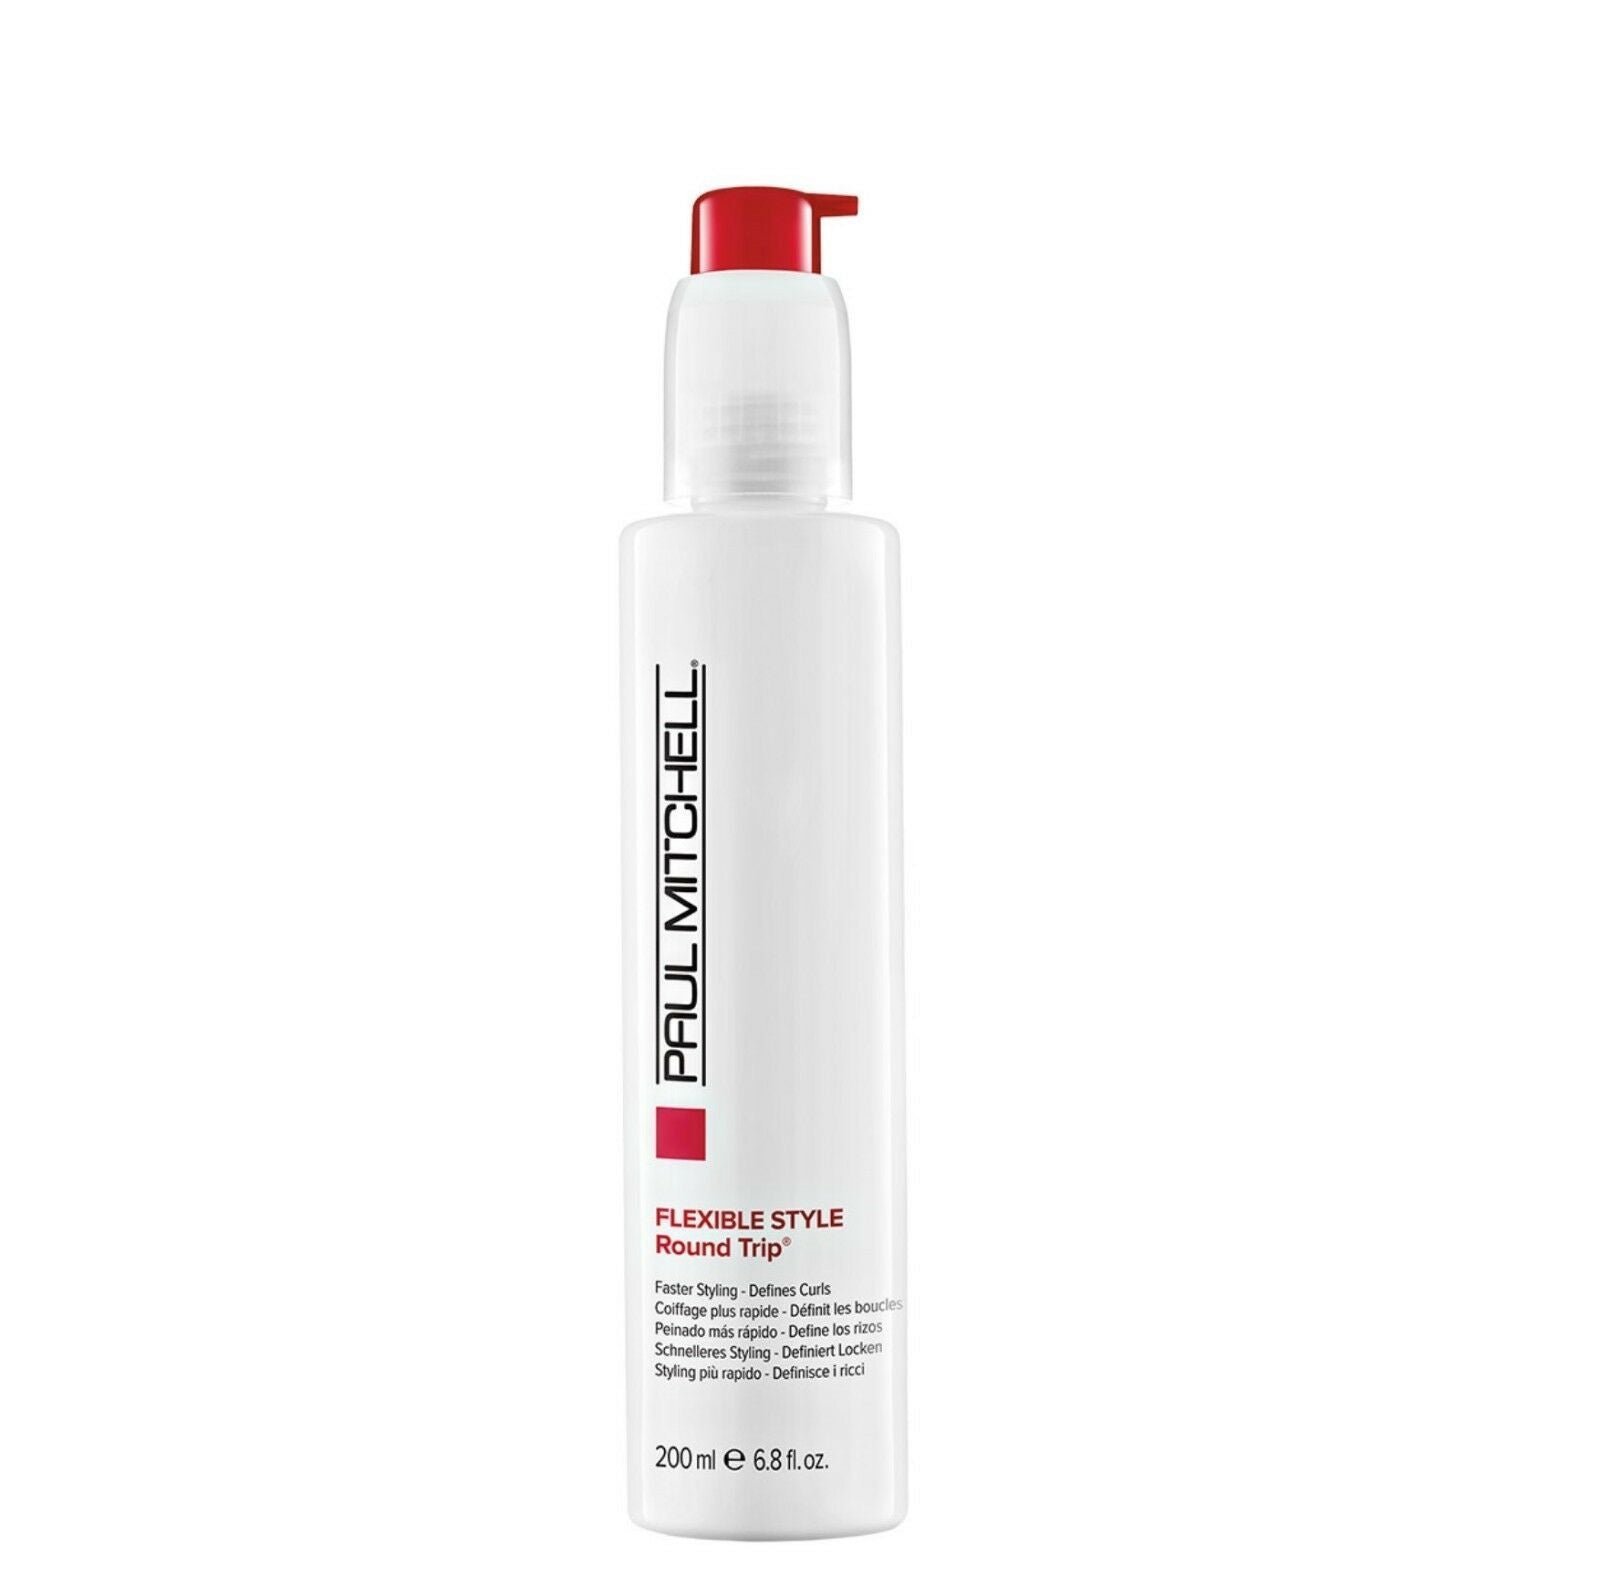 iaahhaircare,Paul Mitchell FLEXIBLE STYLE Round Trip® Faster Styling. Defines Curls 1 x 200ml,Styling Products,Flexible Style Paul Mitchell